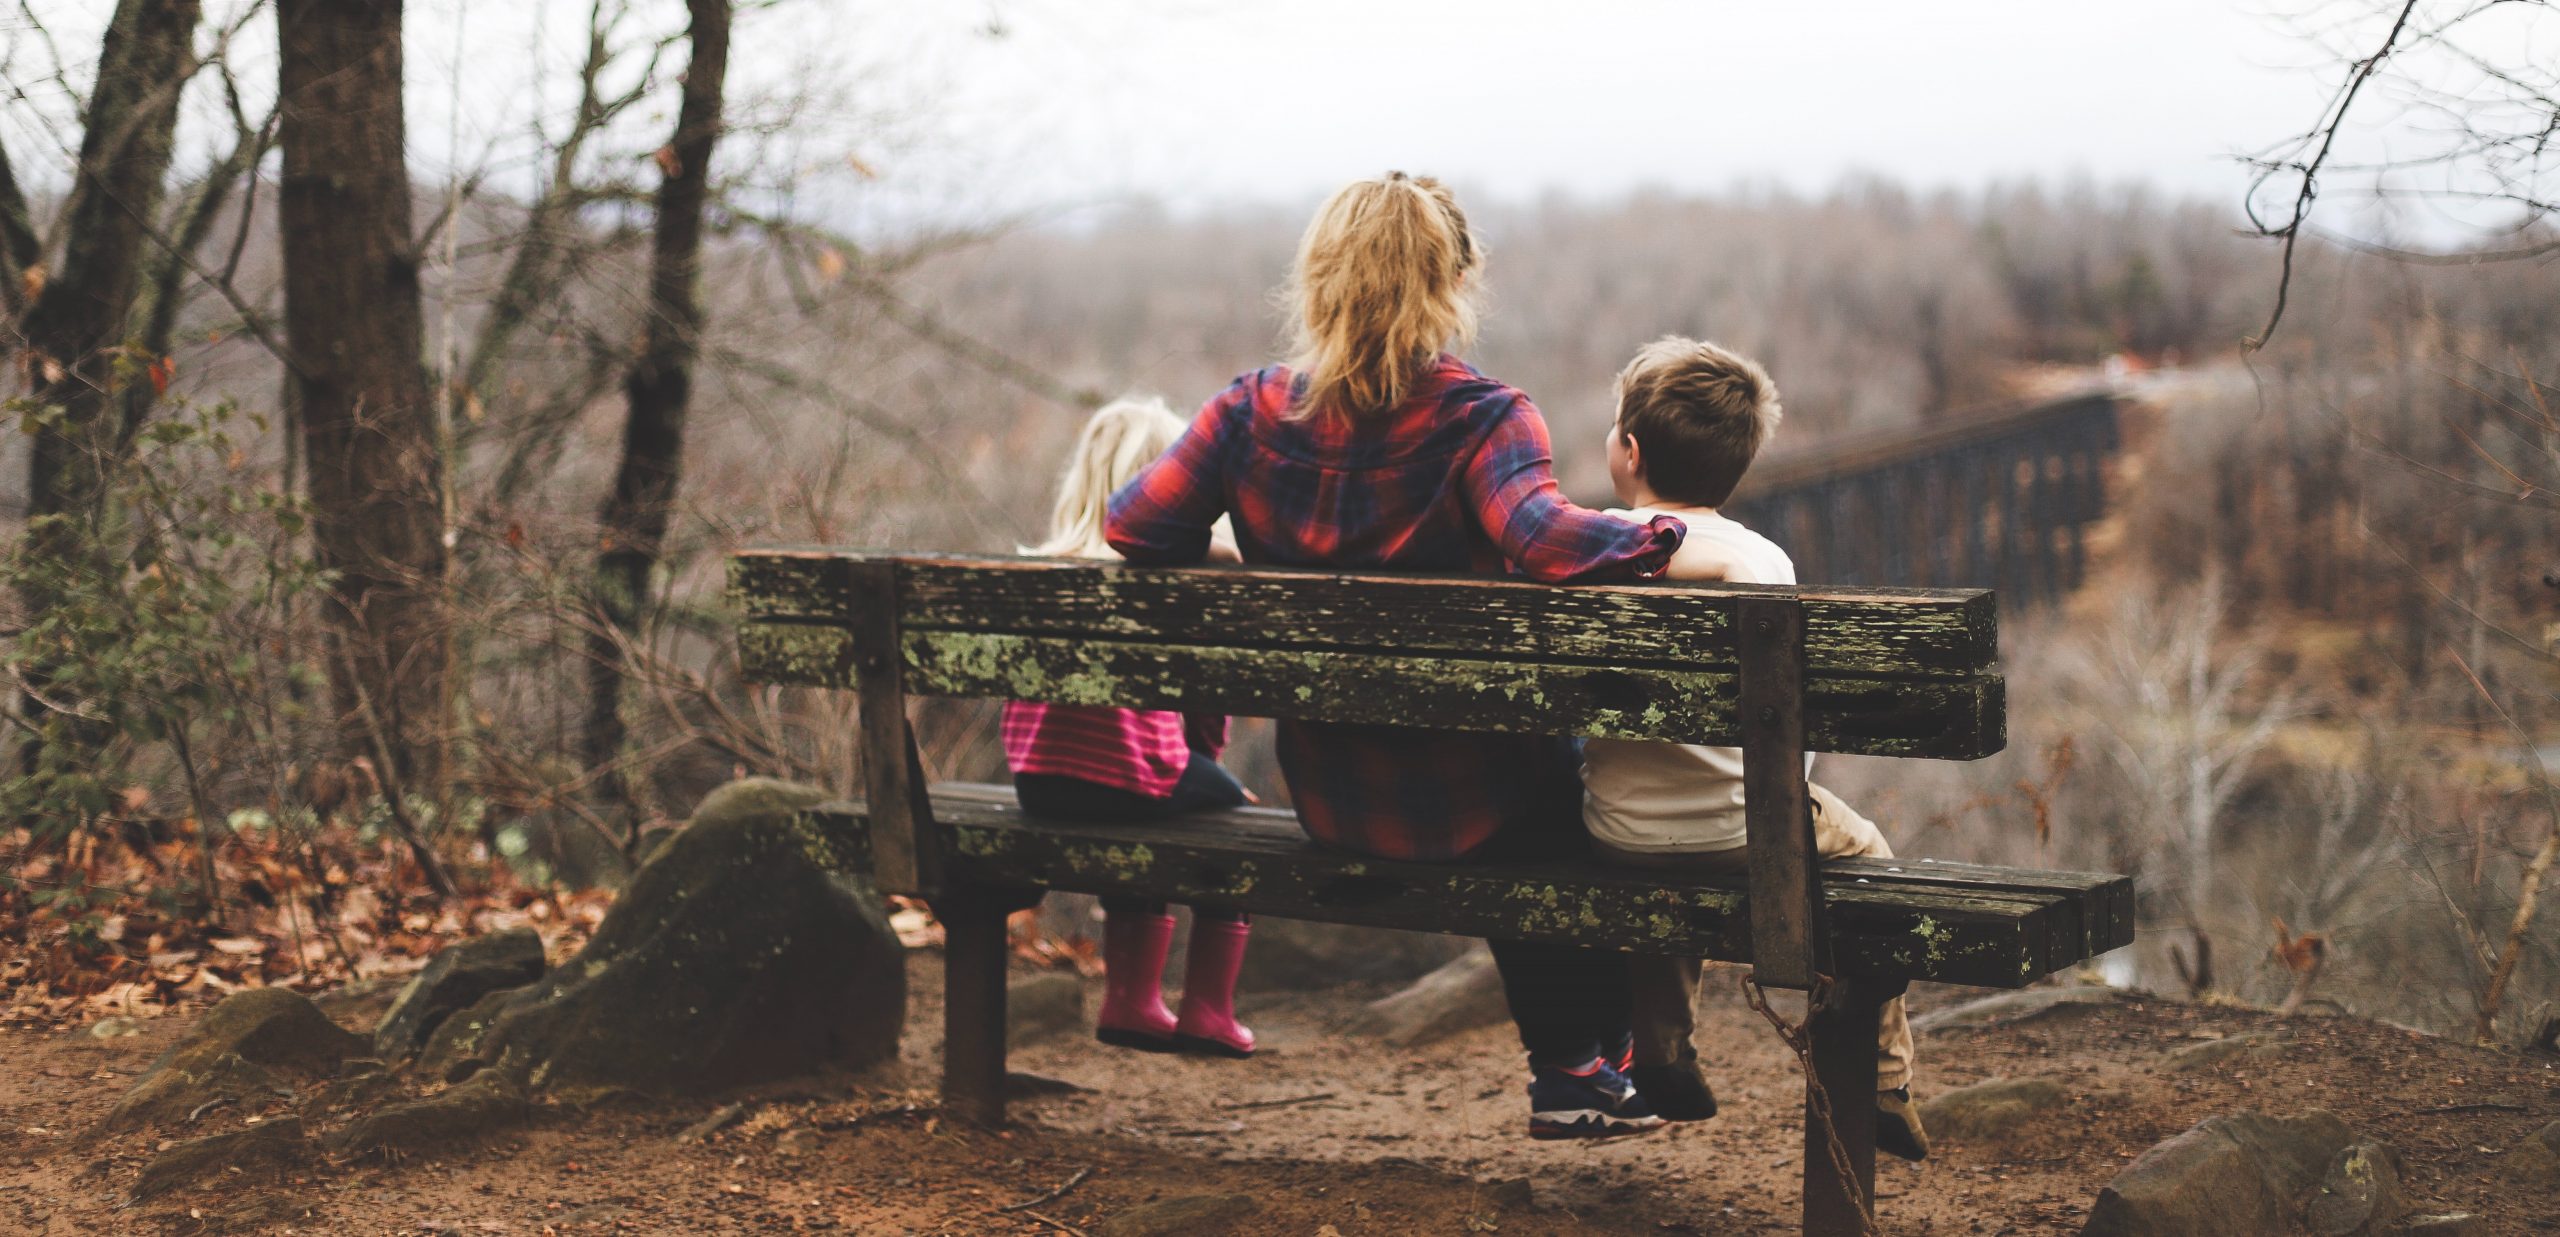 Family law is constantly evolving to promote positive co parenting relationships scaled